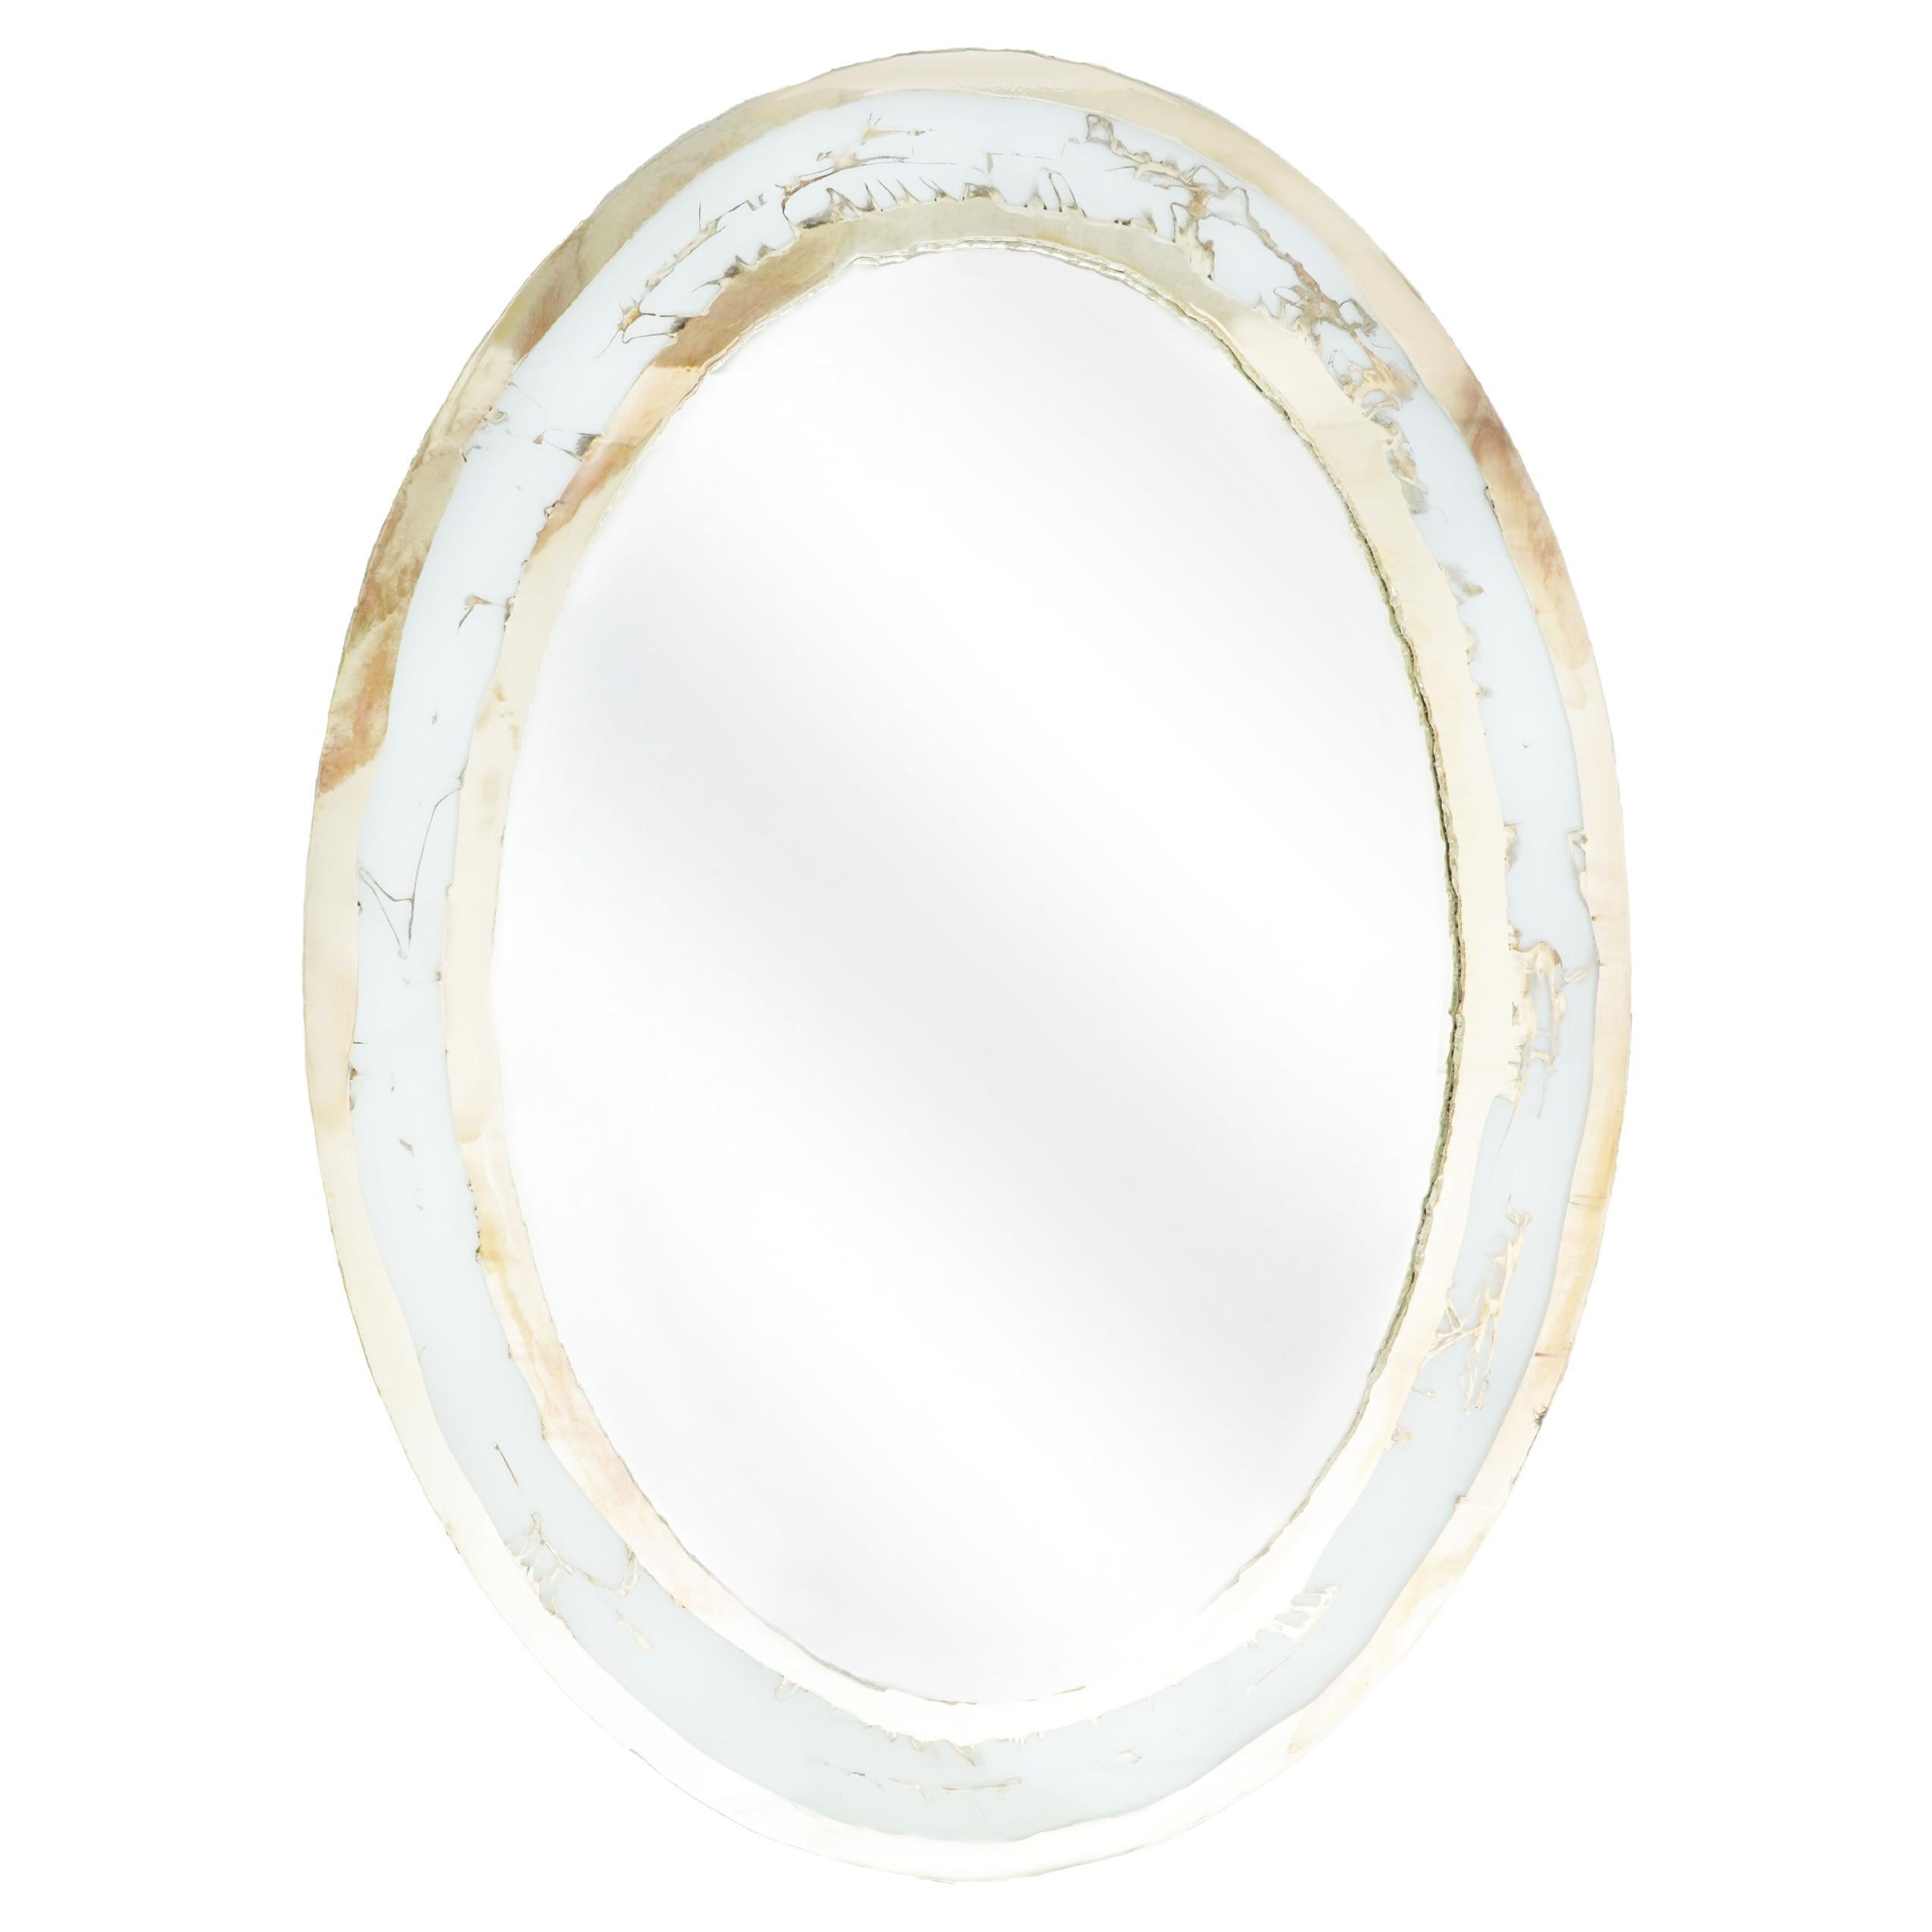 "Life" Contemporary wall Mirror, White Glass frame, art silvered, Central mirror For Sale